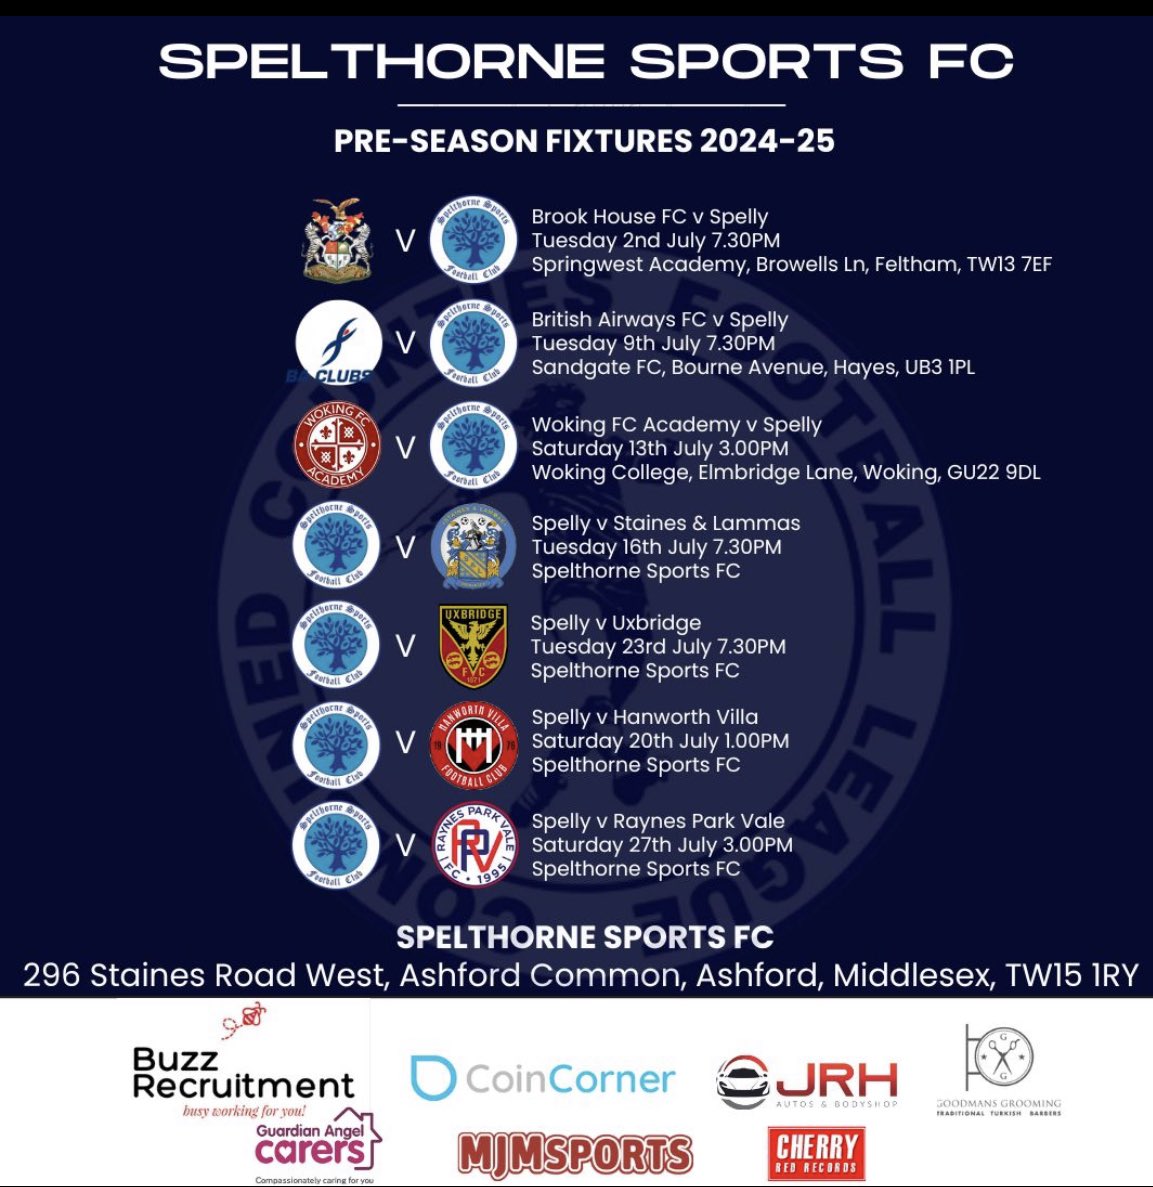 @TheSpellyFC you know I think the world of Spelthorne Sports but don’t forget our full title @SLammasMiddxFC you’ve missed the last, very important, bit off! 💙🤍